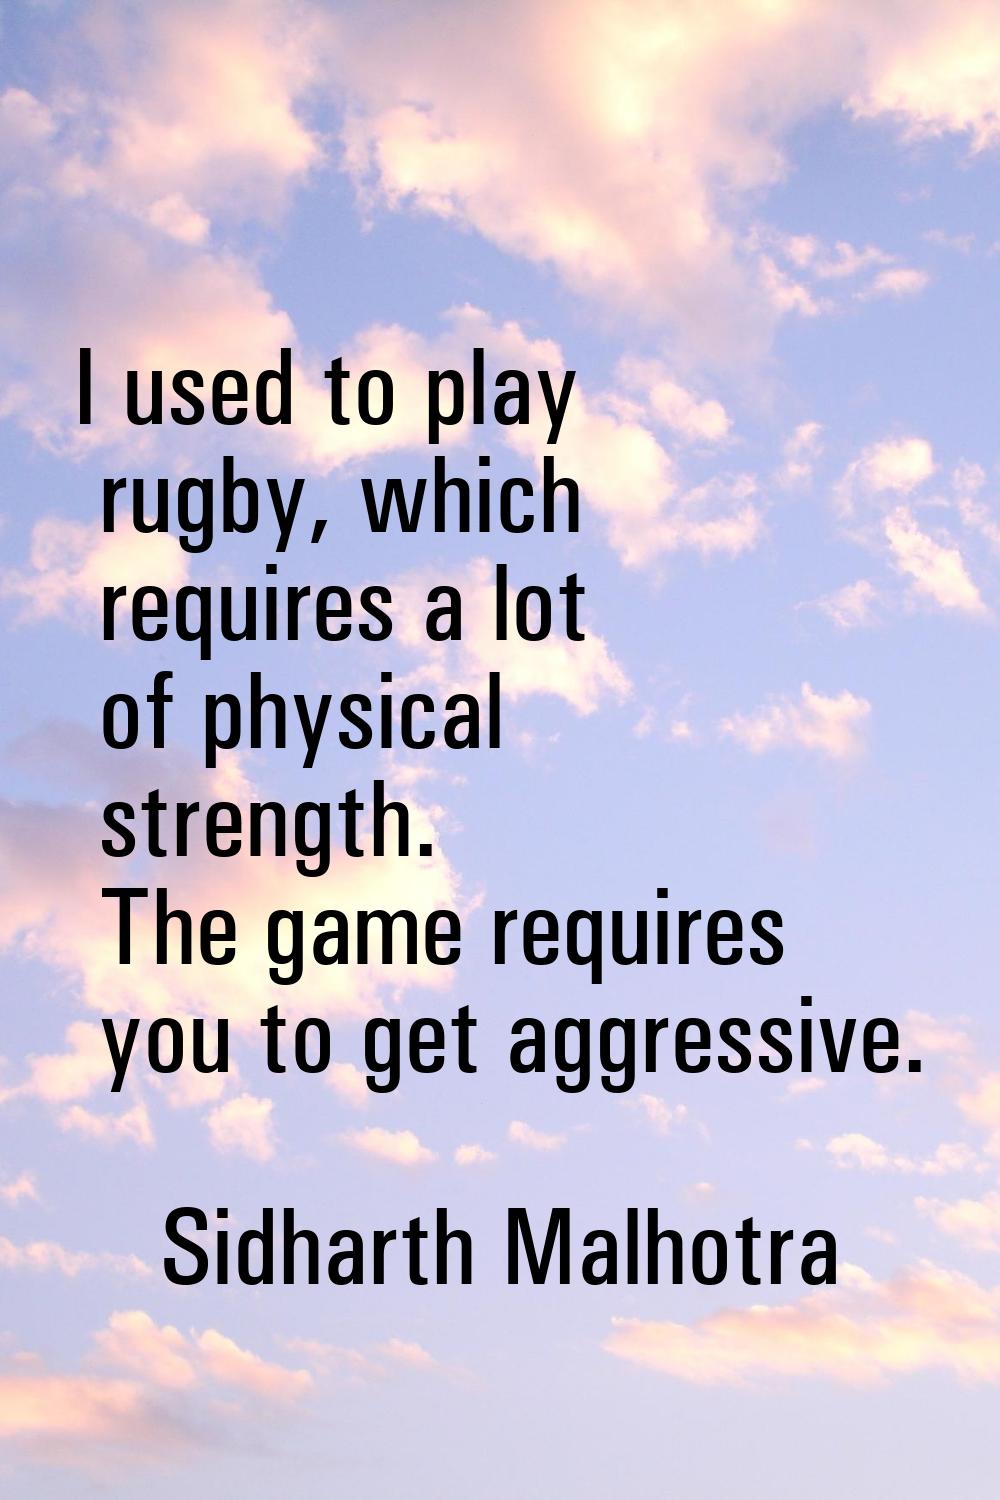 I used to play rugby, which requires a lot of physical strength. The game requires you to get aggre